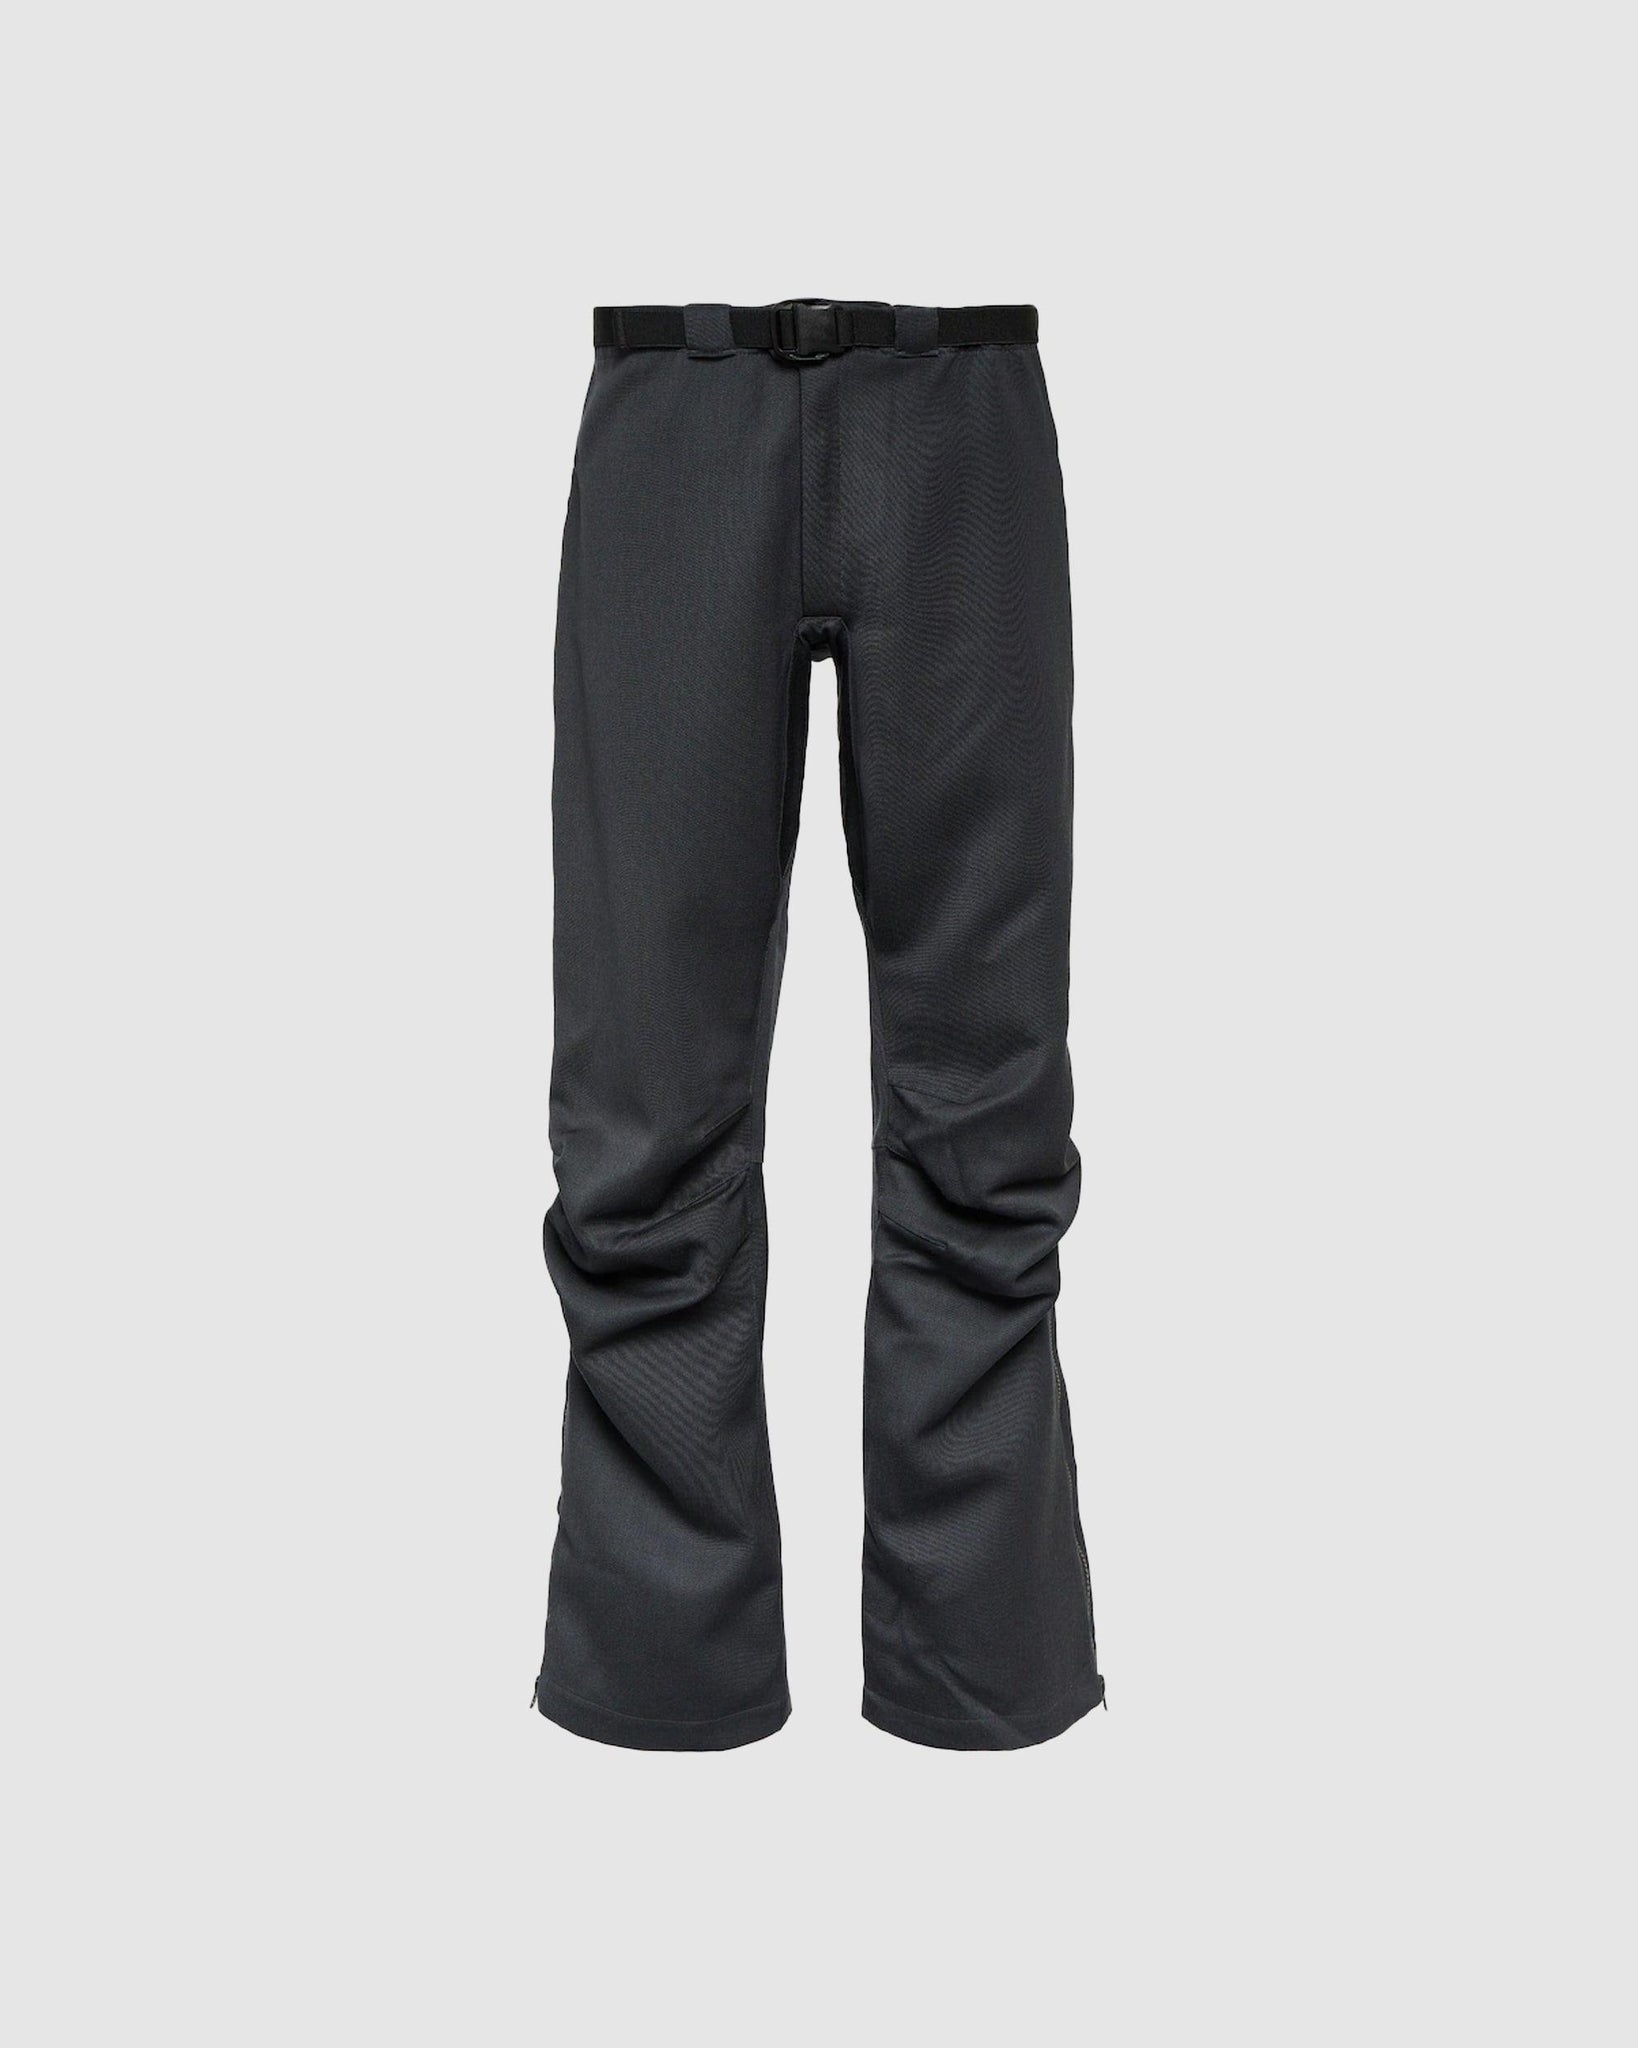 Titanus Arc Pants - {{ collection.title }} - Chinatown Country Club 